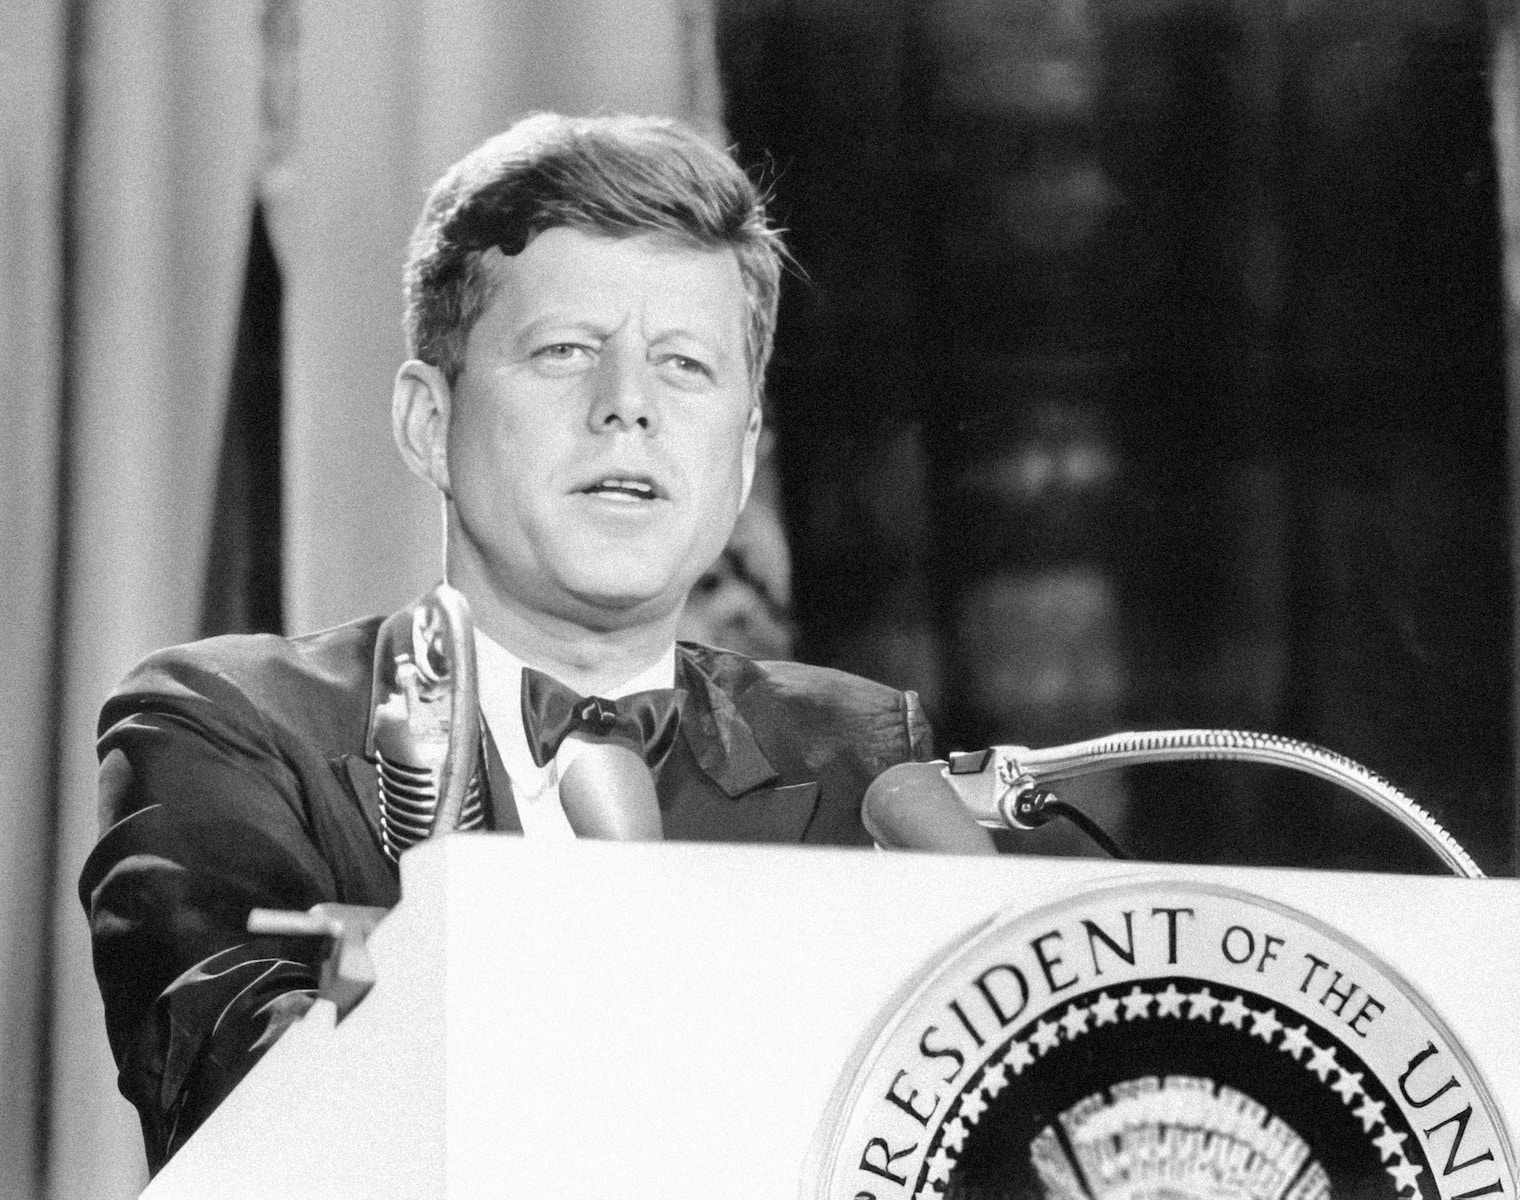 Kennedy assisnation, a man in a suit and tie standing at a podium